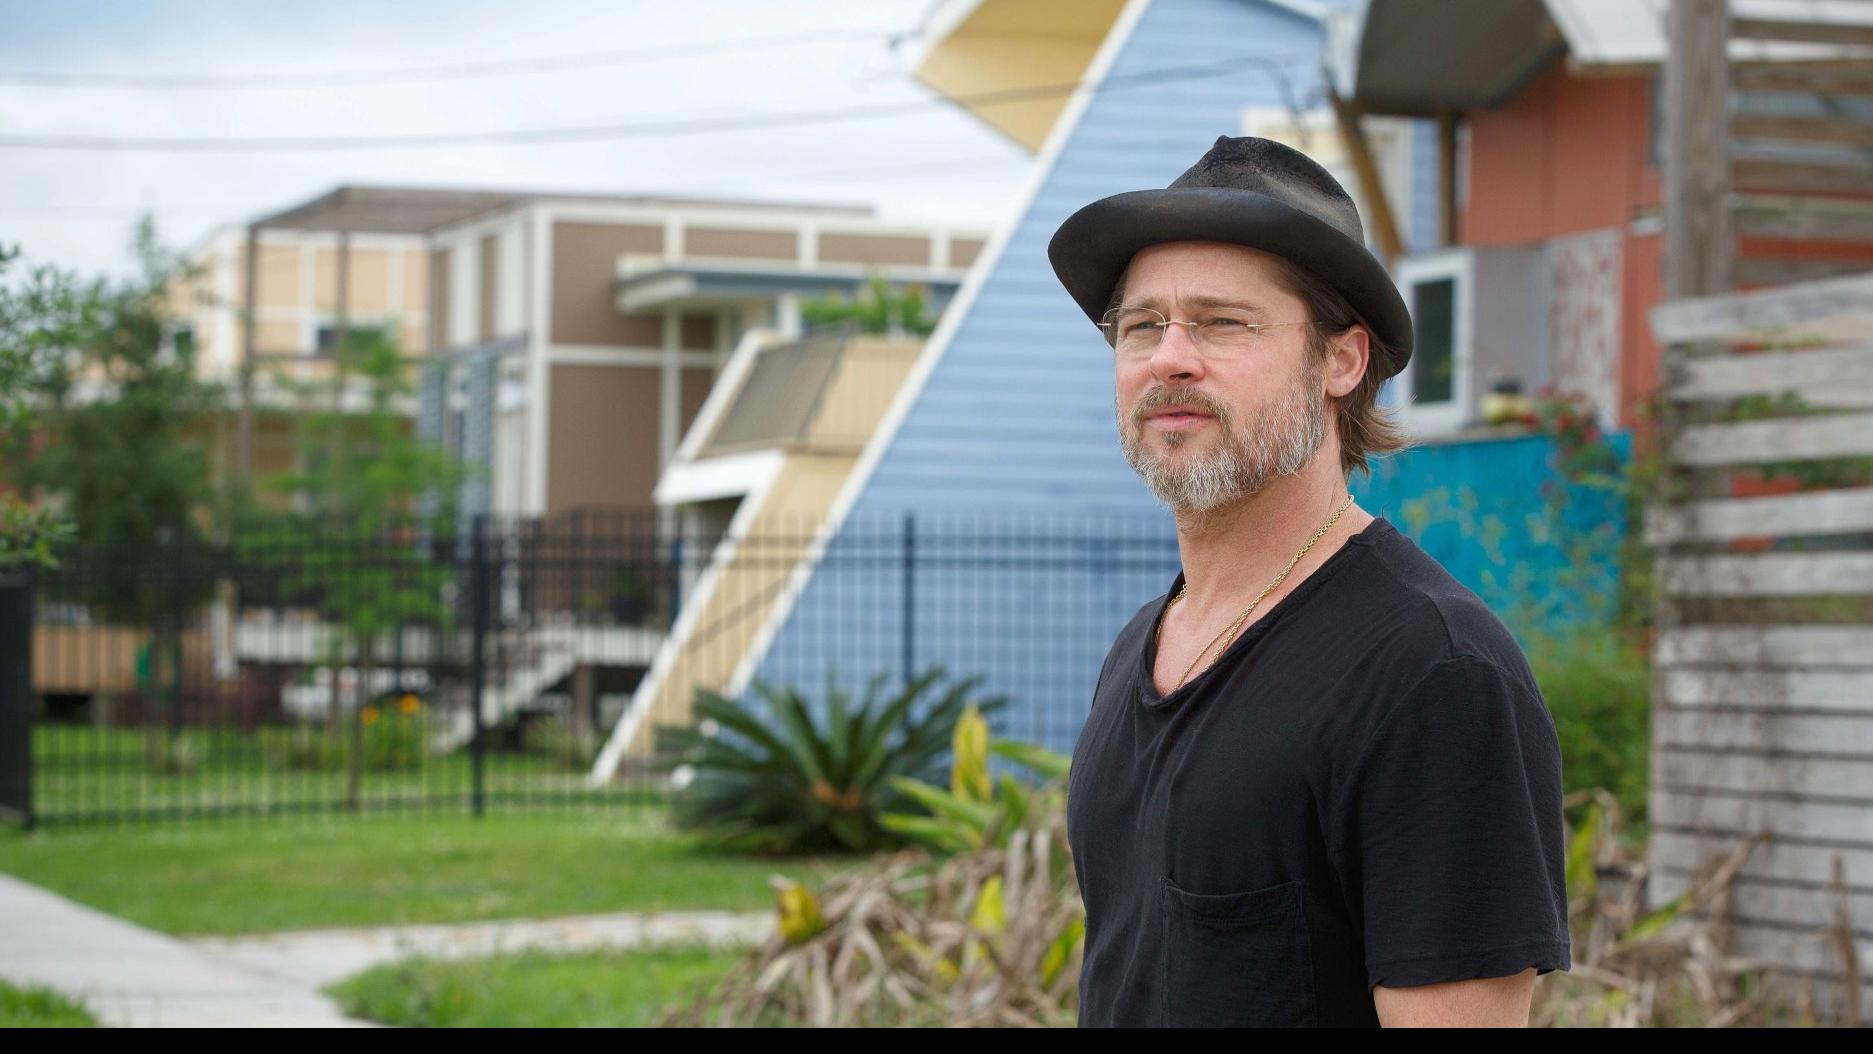 Brad Pitt S Make It Right Is Back In Court Suing Its Former Director Over Faulty Homes Project News Nola Com